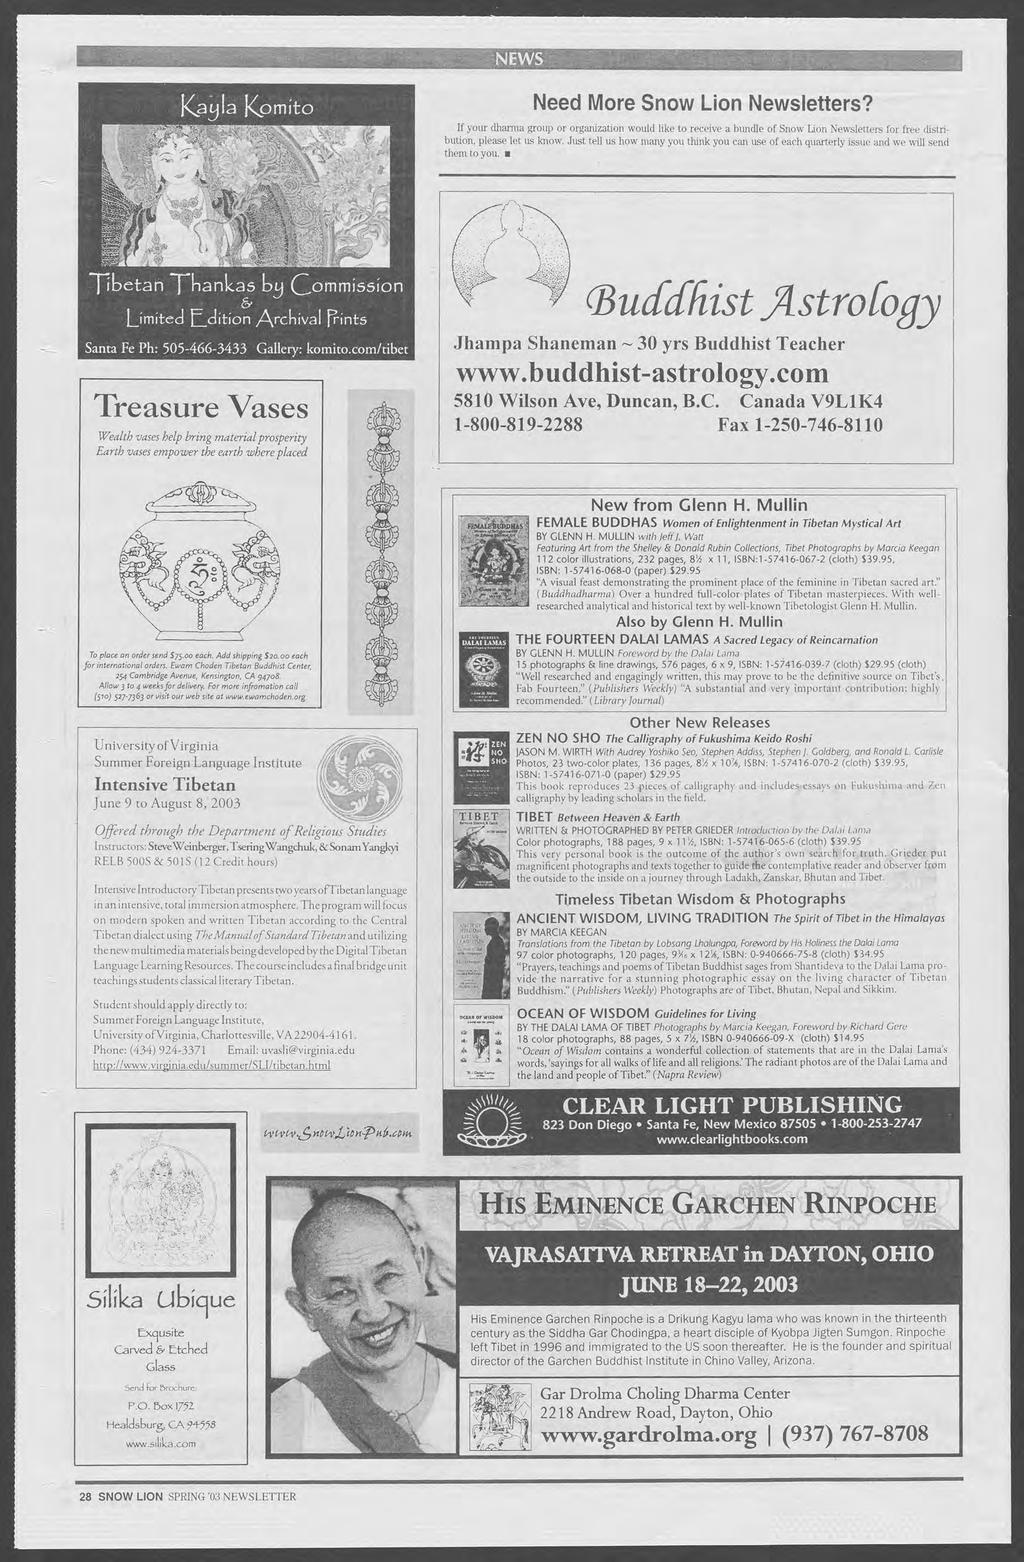 Katjla Kpmito Need More Snow Lion Newsletters? If your dharma group or organization would like to receive a bundle of Snow Lion Newsletters for free distribution, please let us know.